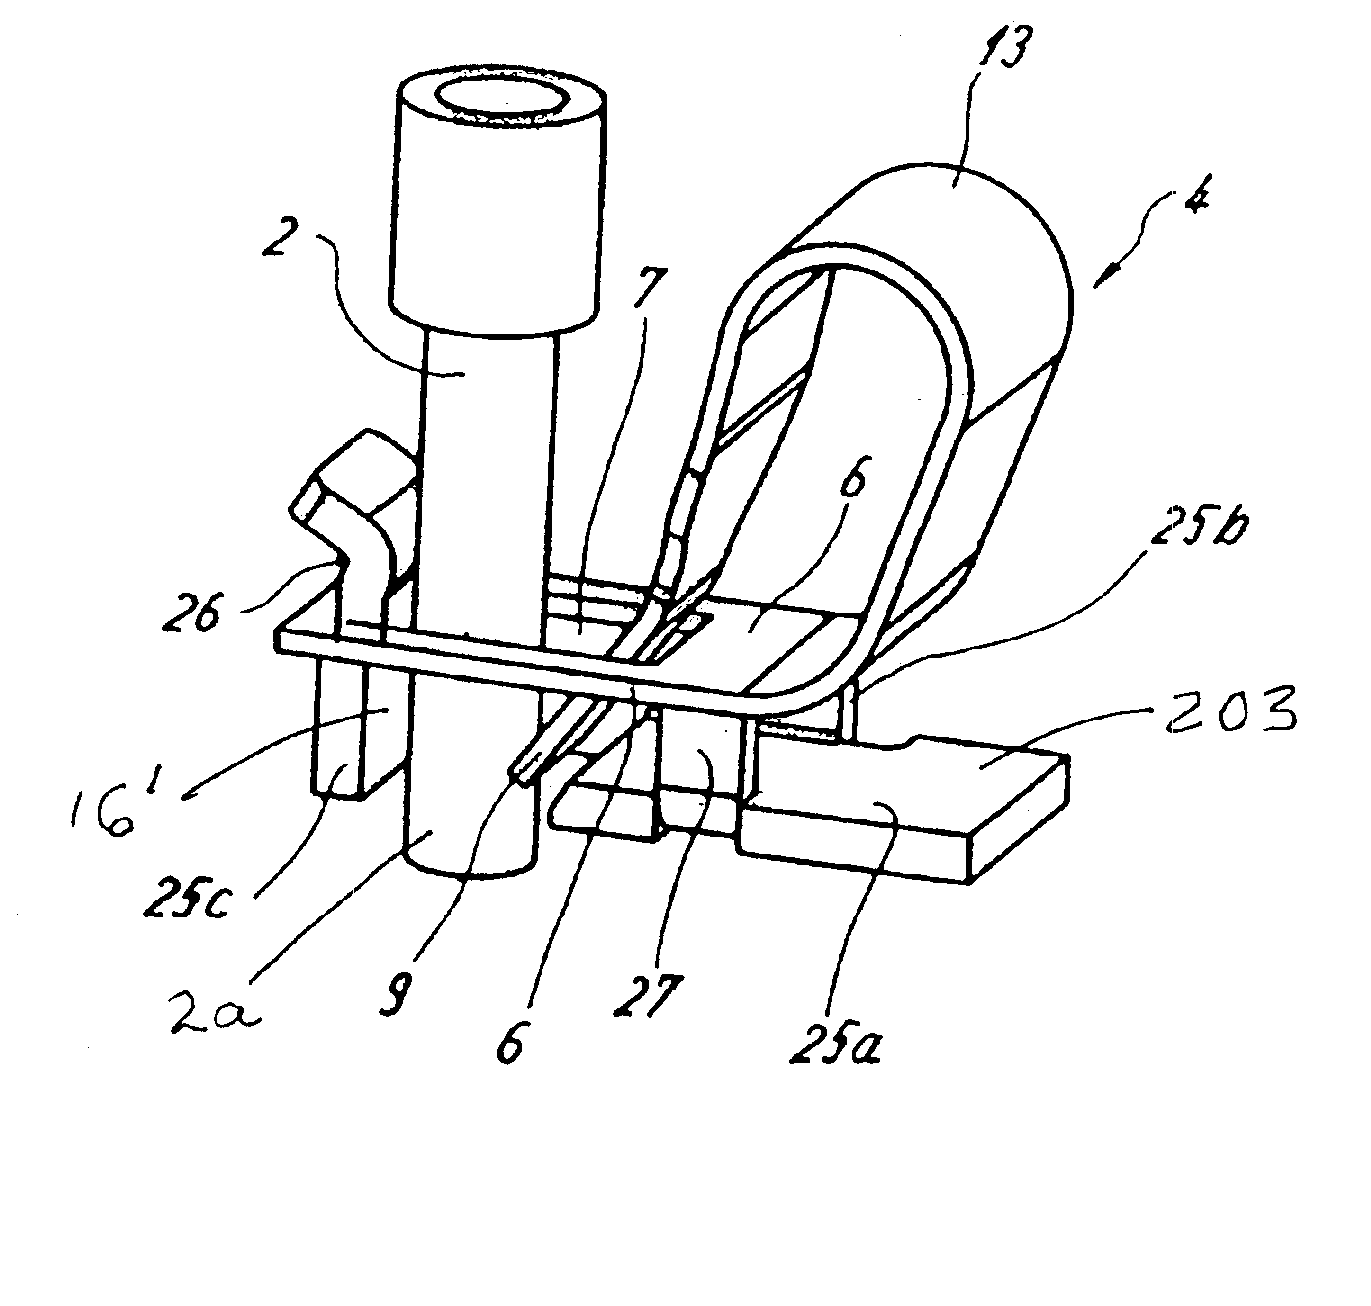 Connector apparatus adapted for the direct plug-in connection of conductors